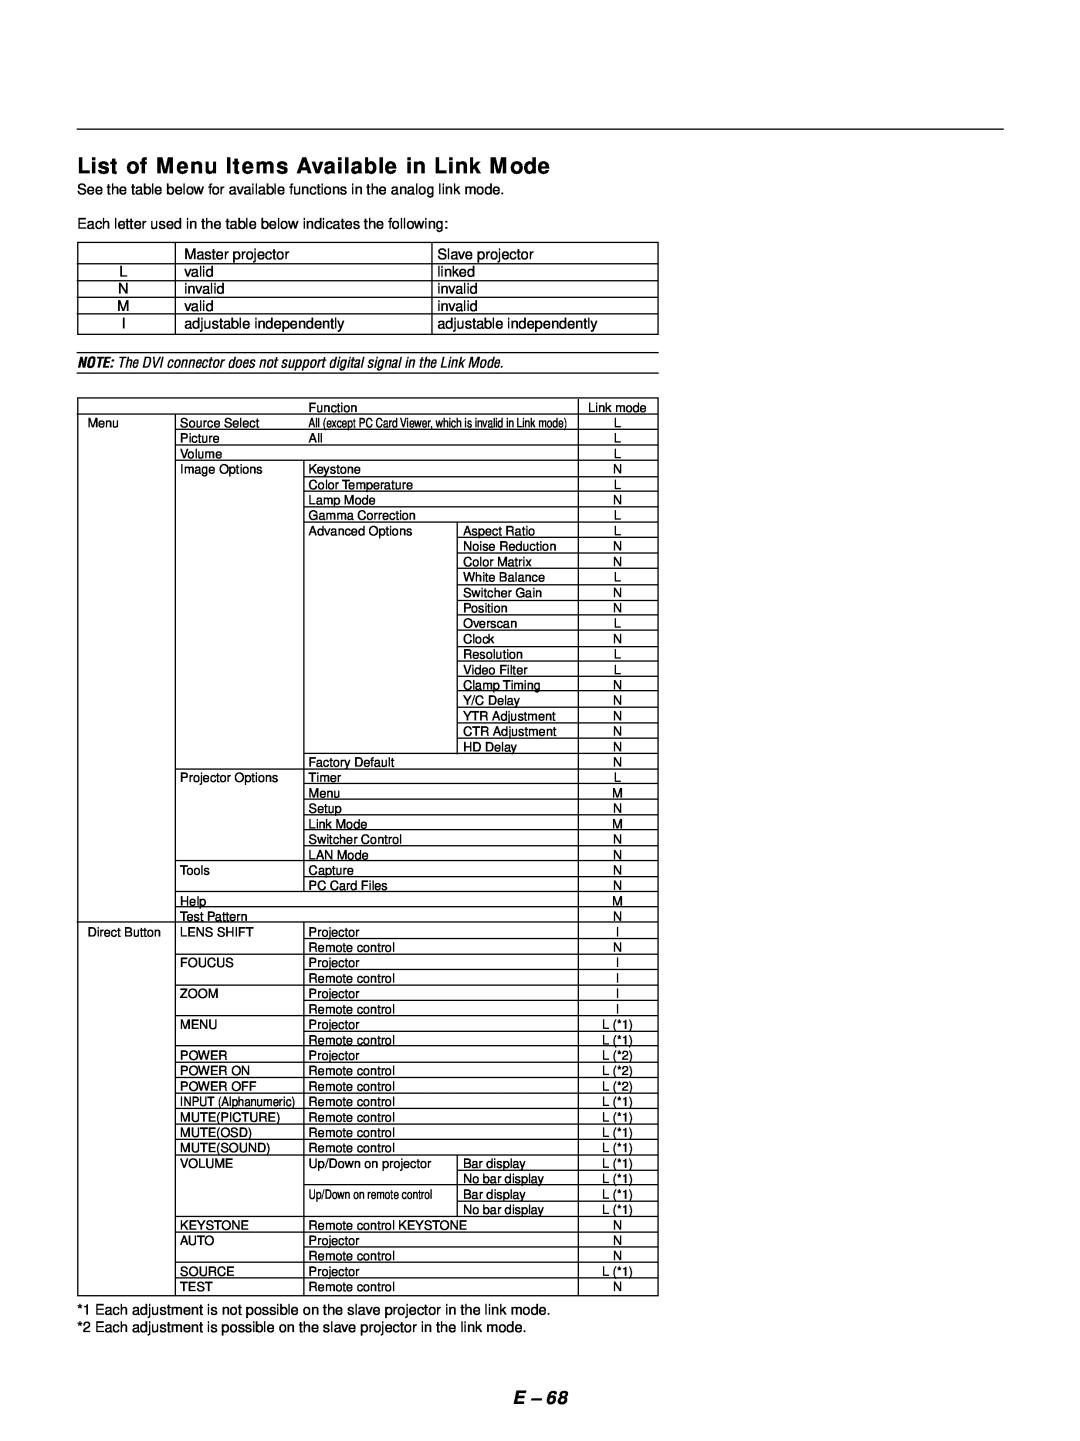 NEC GT1150 user manual List of Menu Items Available in Link Mode, All except PC Card Viewer, which is invalid in Link mode 